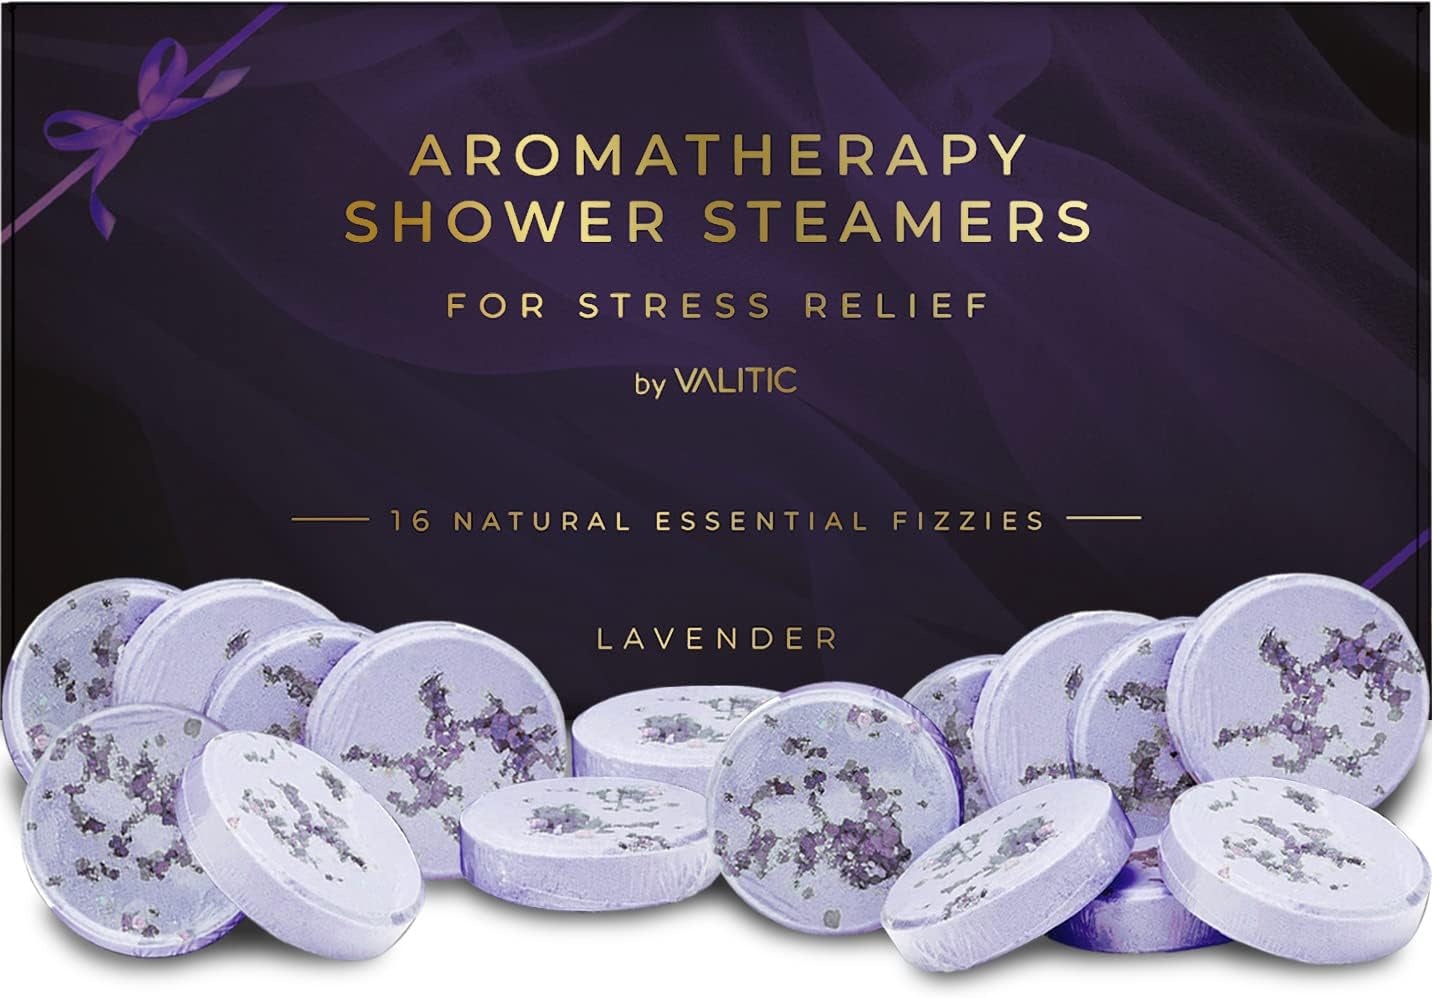 Aromatherapy Shower Steamers for Stress Relief and Relaxation - Gifts for Women Mom Birthday 8 Natural Essential Fizzies Shower Bombs - 4 Scents - Lavender, Eucalyptus, Citrus, and Peppermint